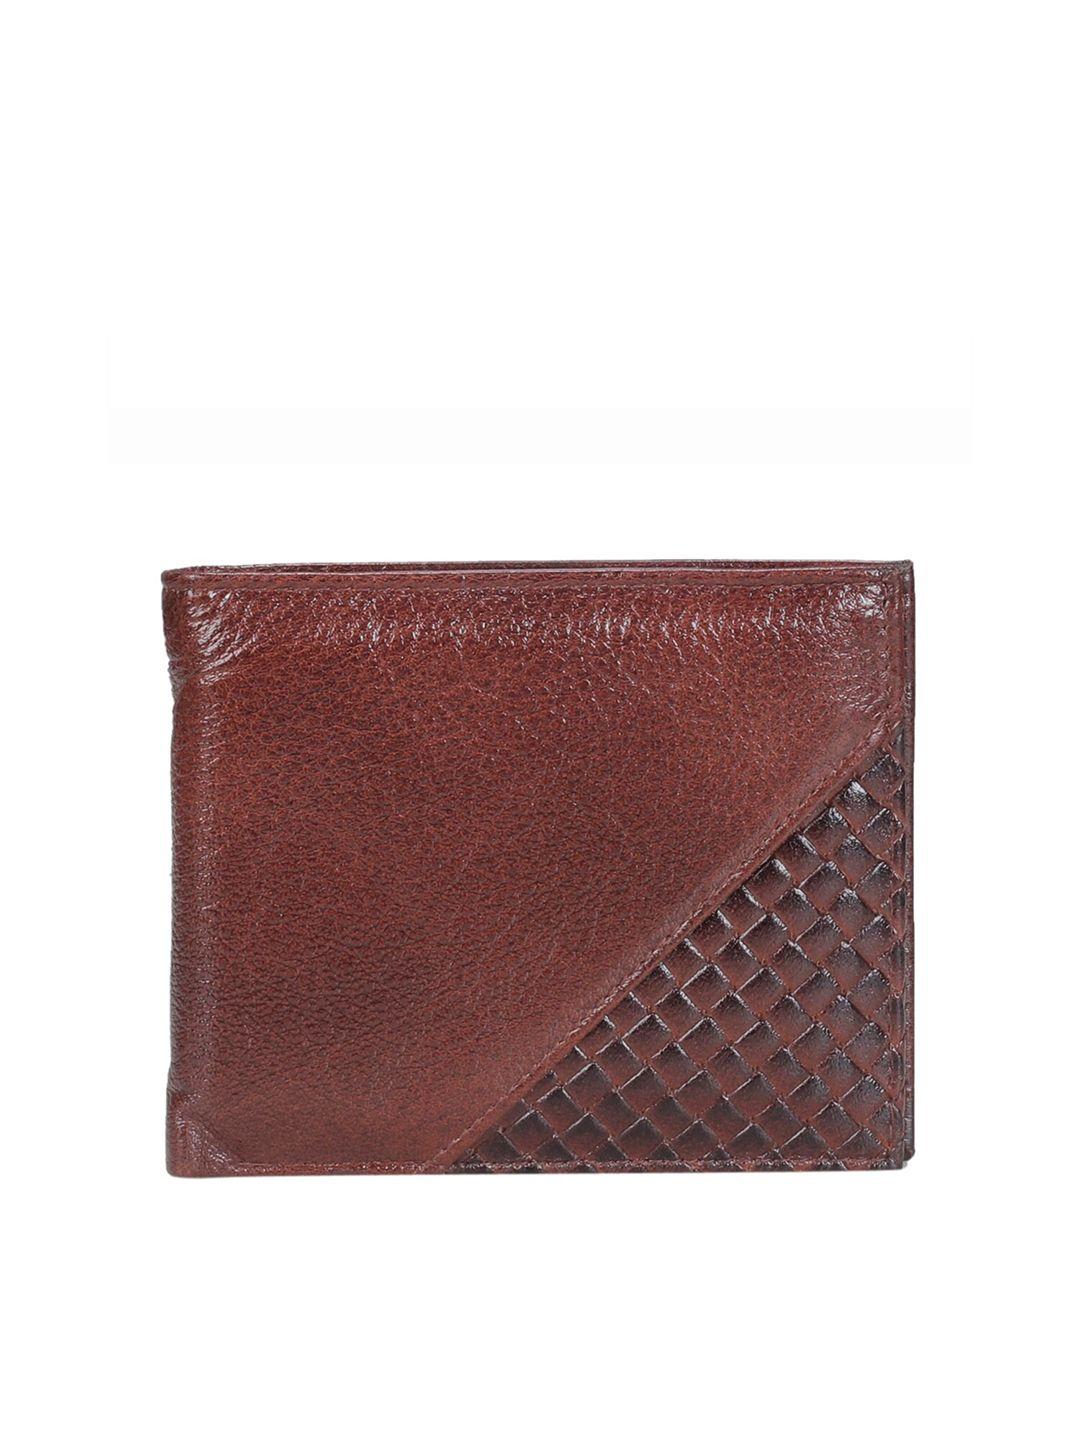 khadims men textured leather two fold wallet